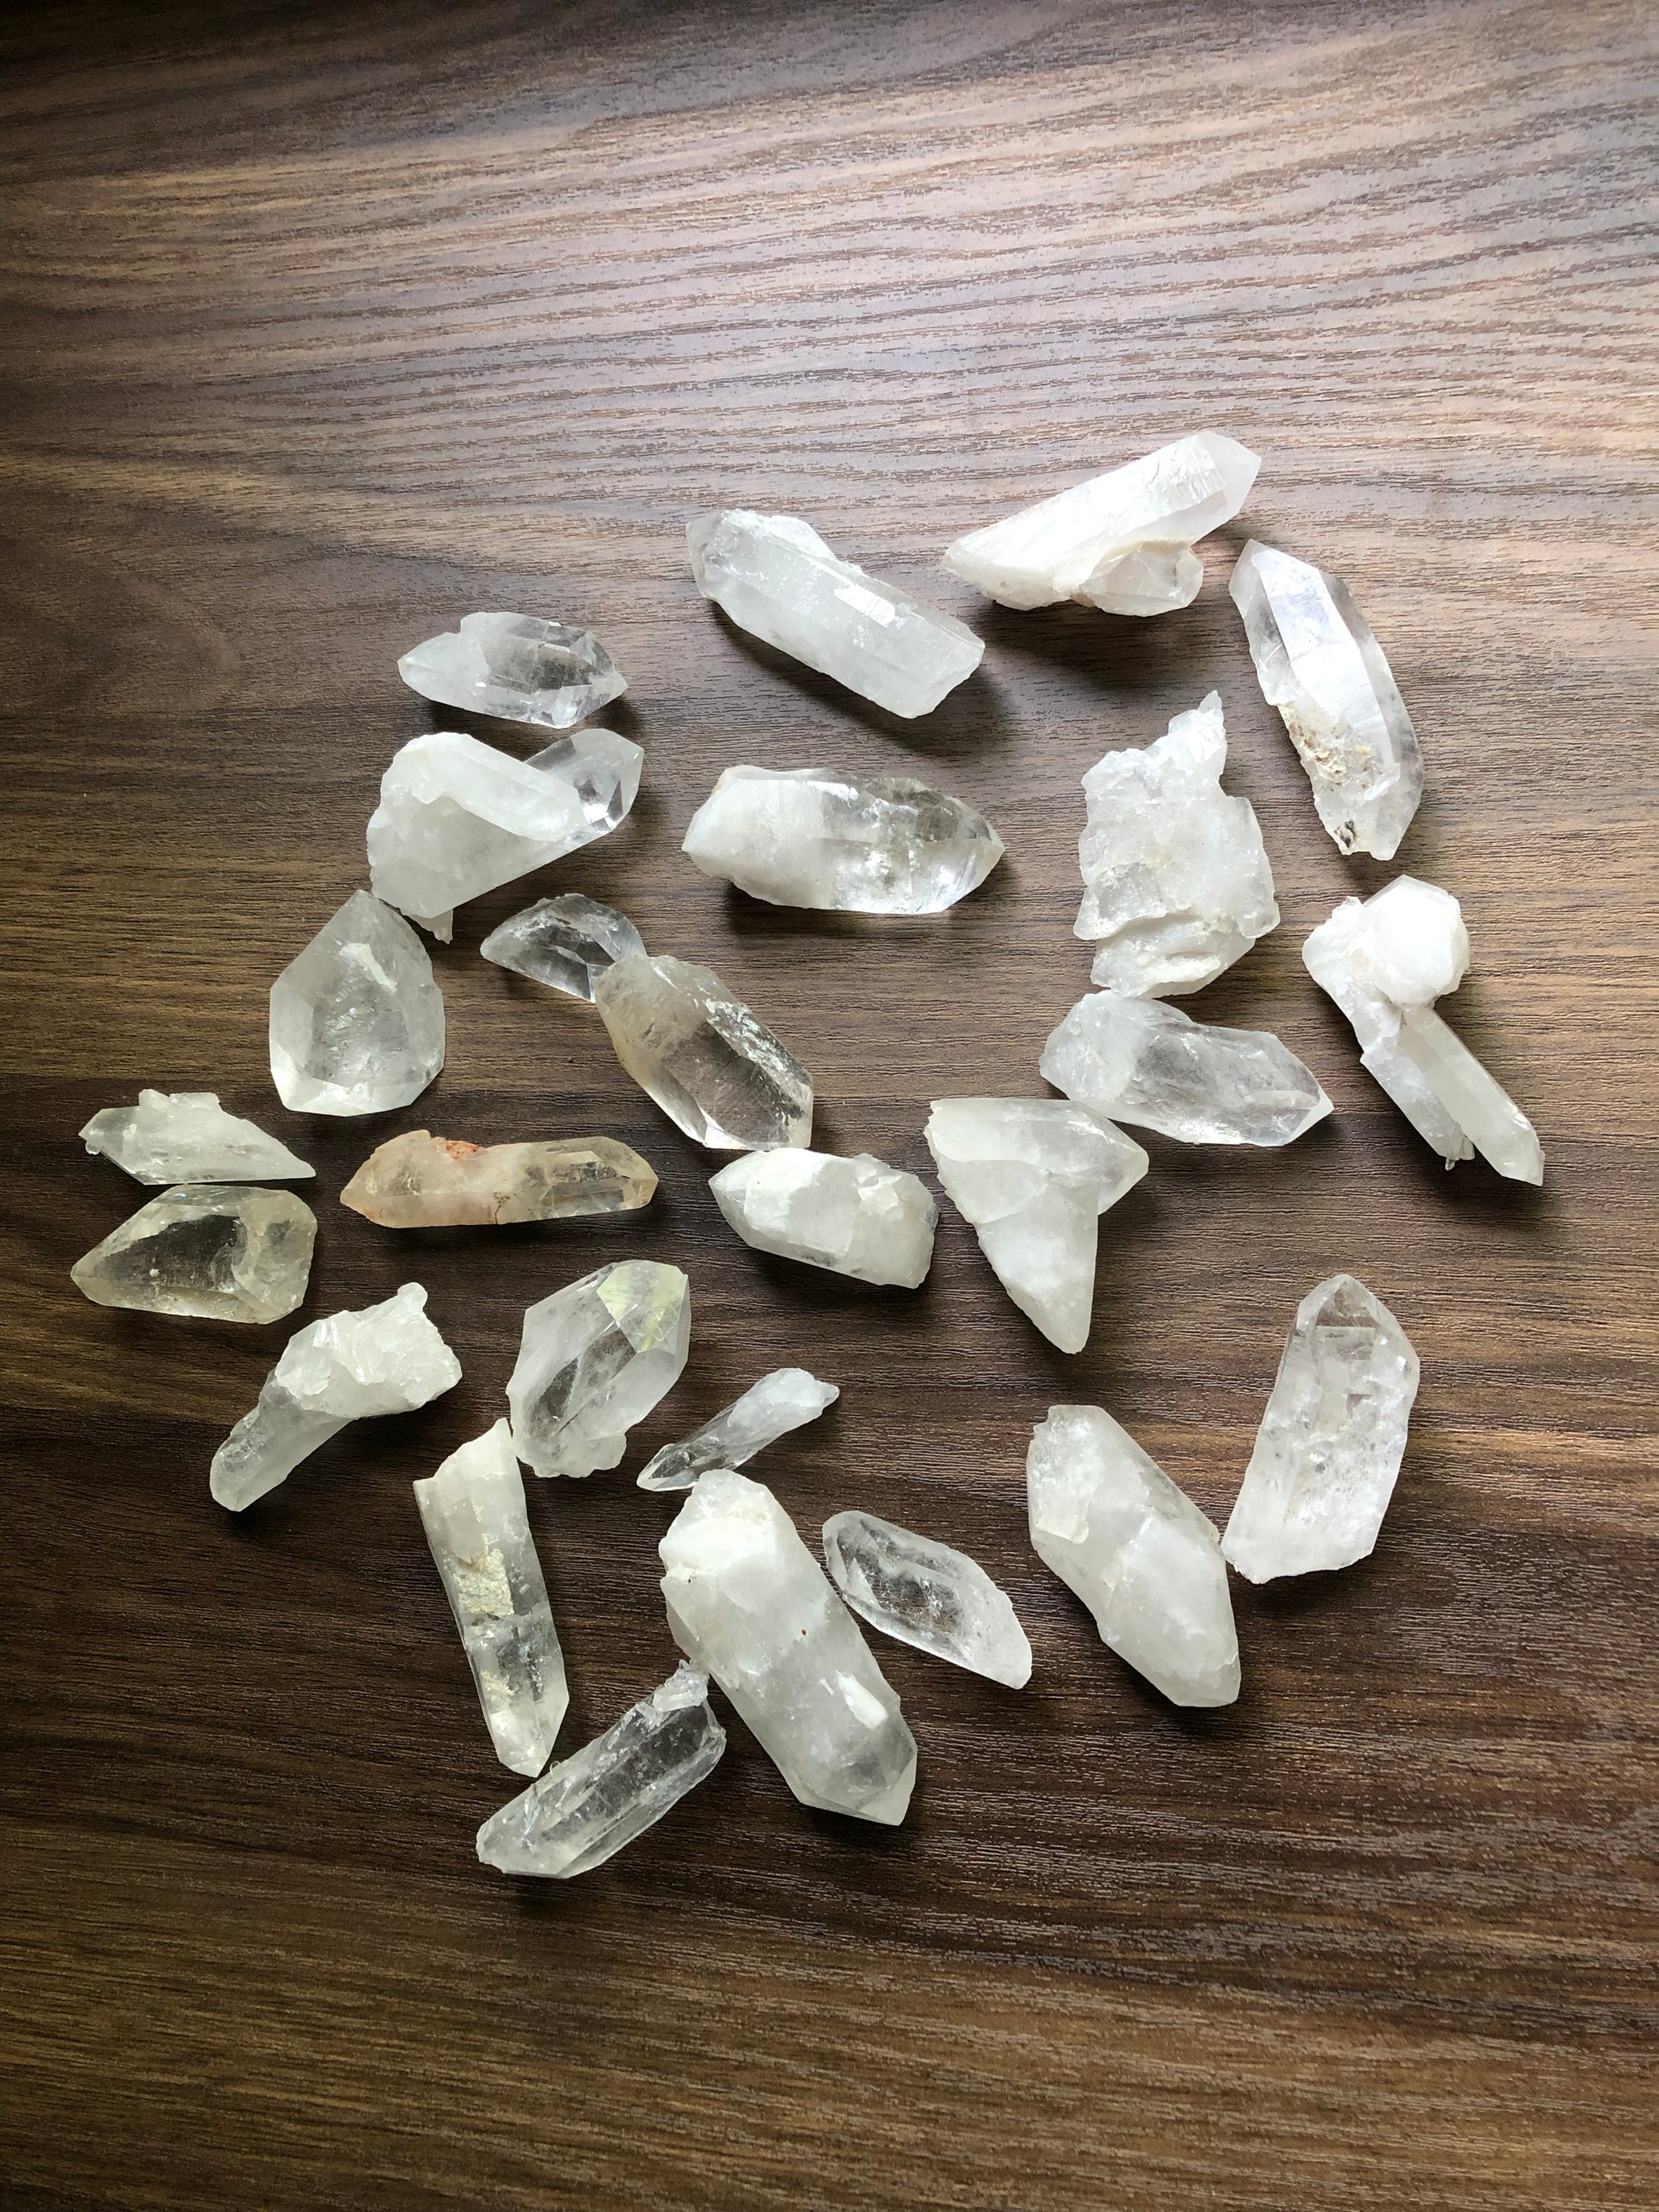 A top down view of an assortment of small sized rough cut quartz crystals on a wooden surface. They are various shapes. They are all relatively clear, with some having slight discoloration.